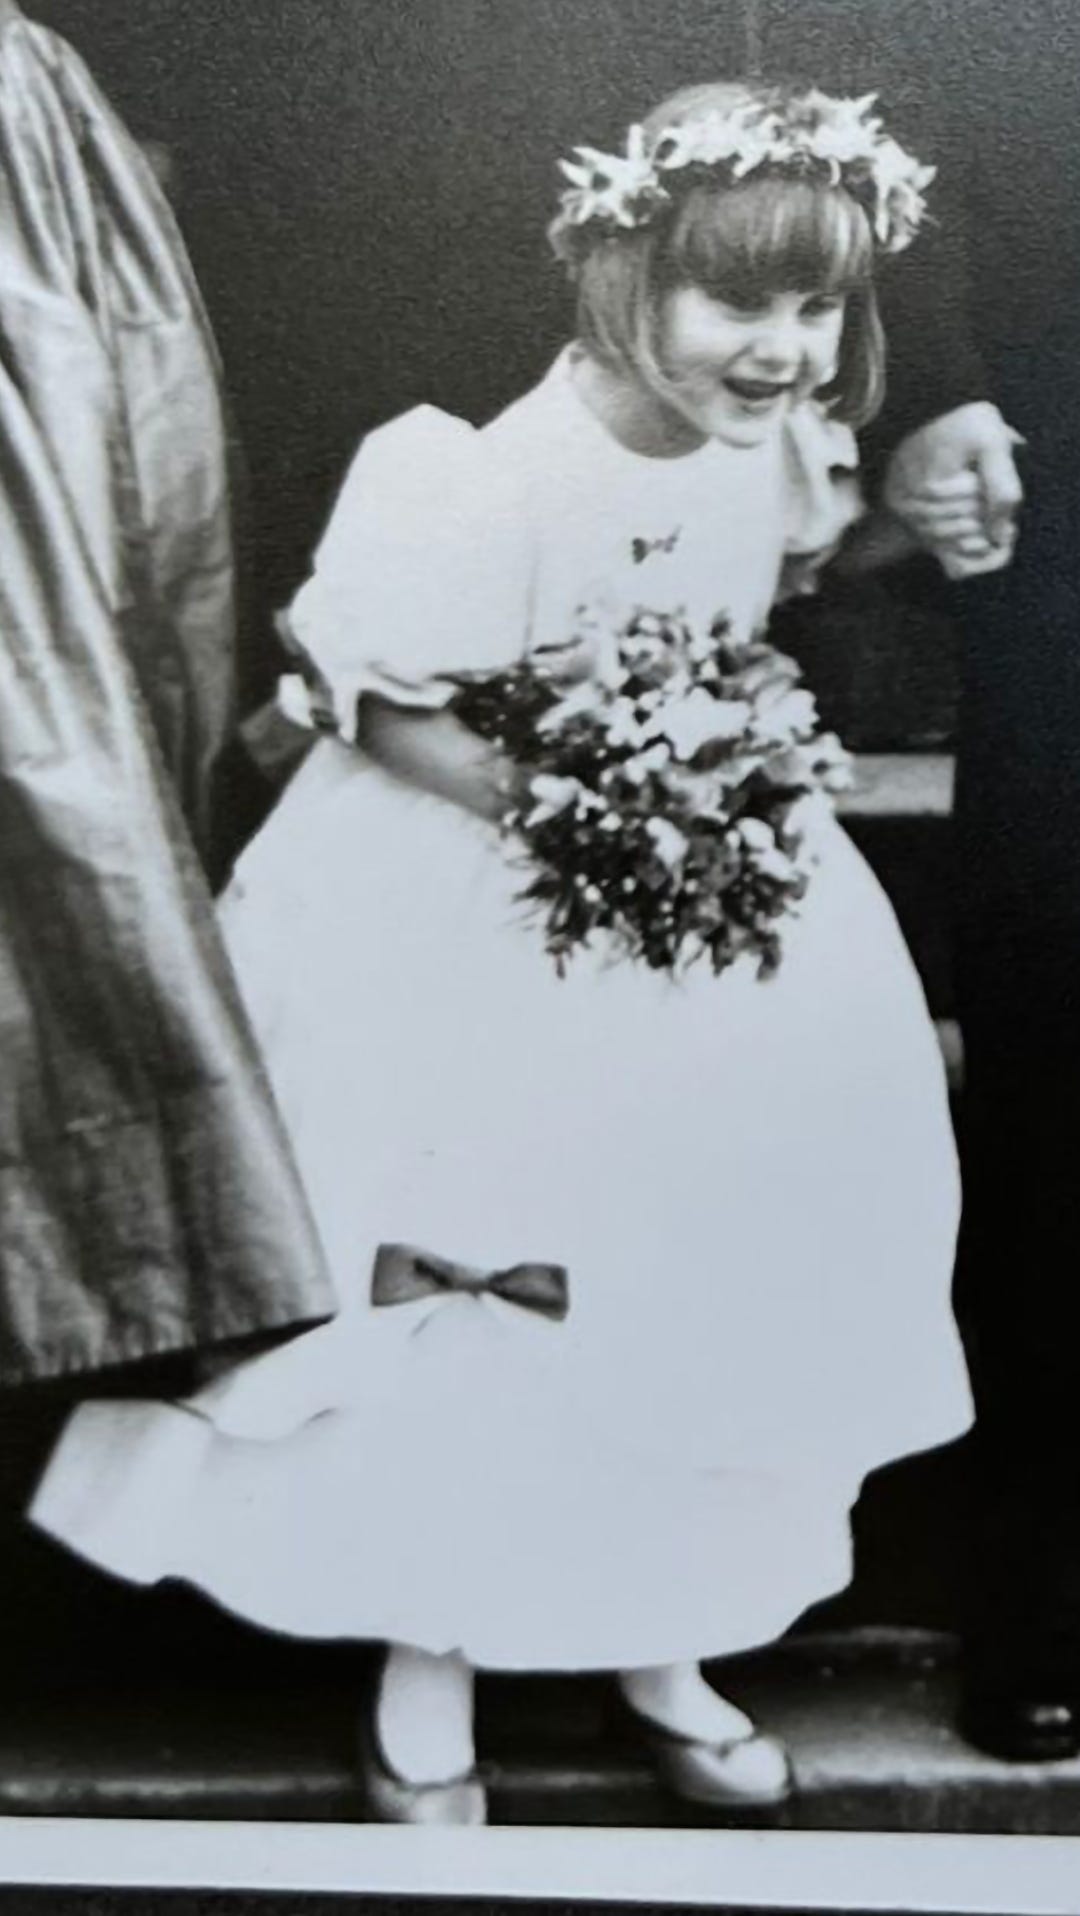 Hannah, aged five, in a black and white photo, wearing a white meringue flower girl dress with blue ribbons and blue shoes, a floral headband, and carrying a small bouquet. She is holding the hand of the groom who is out of shot due to cropping. 